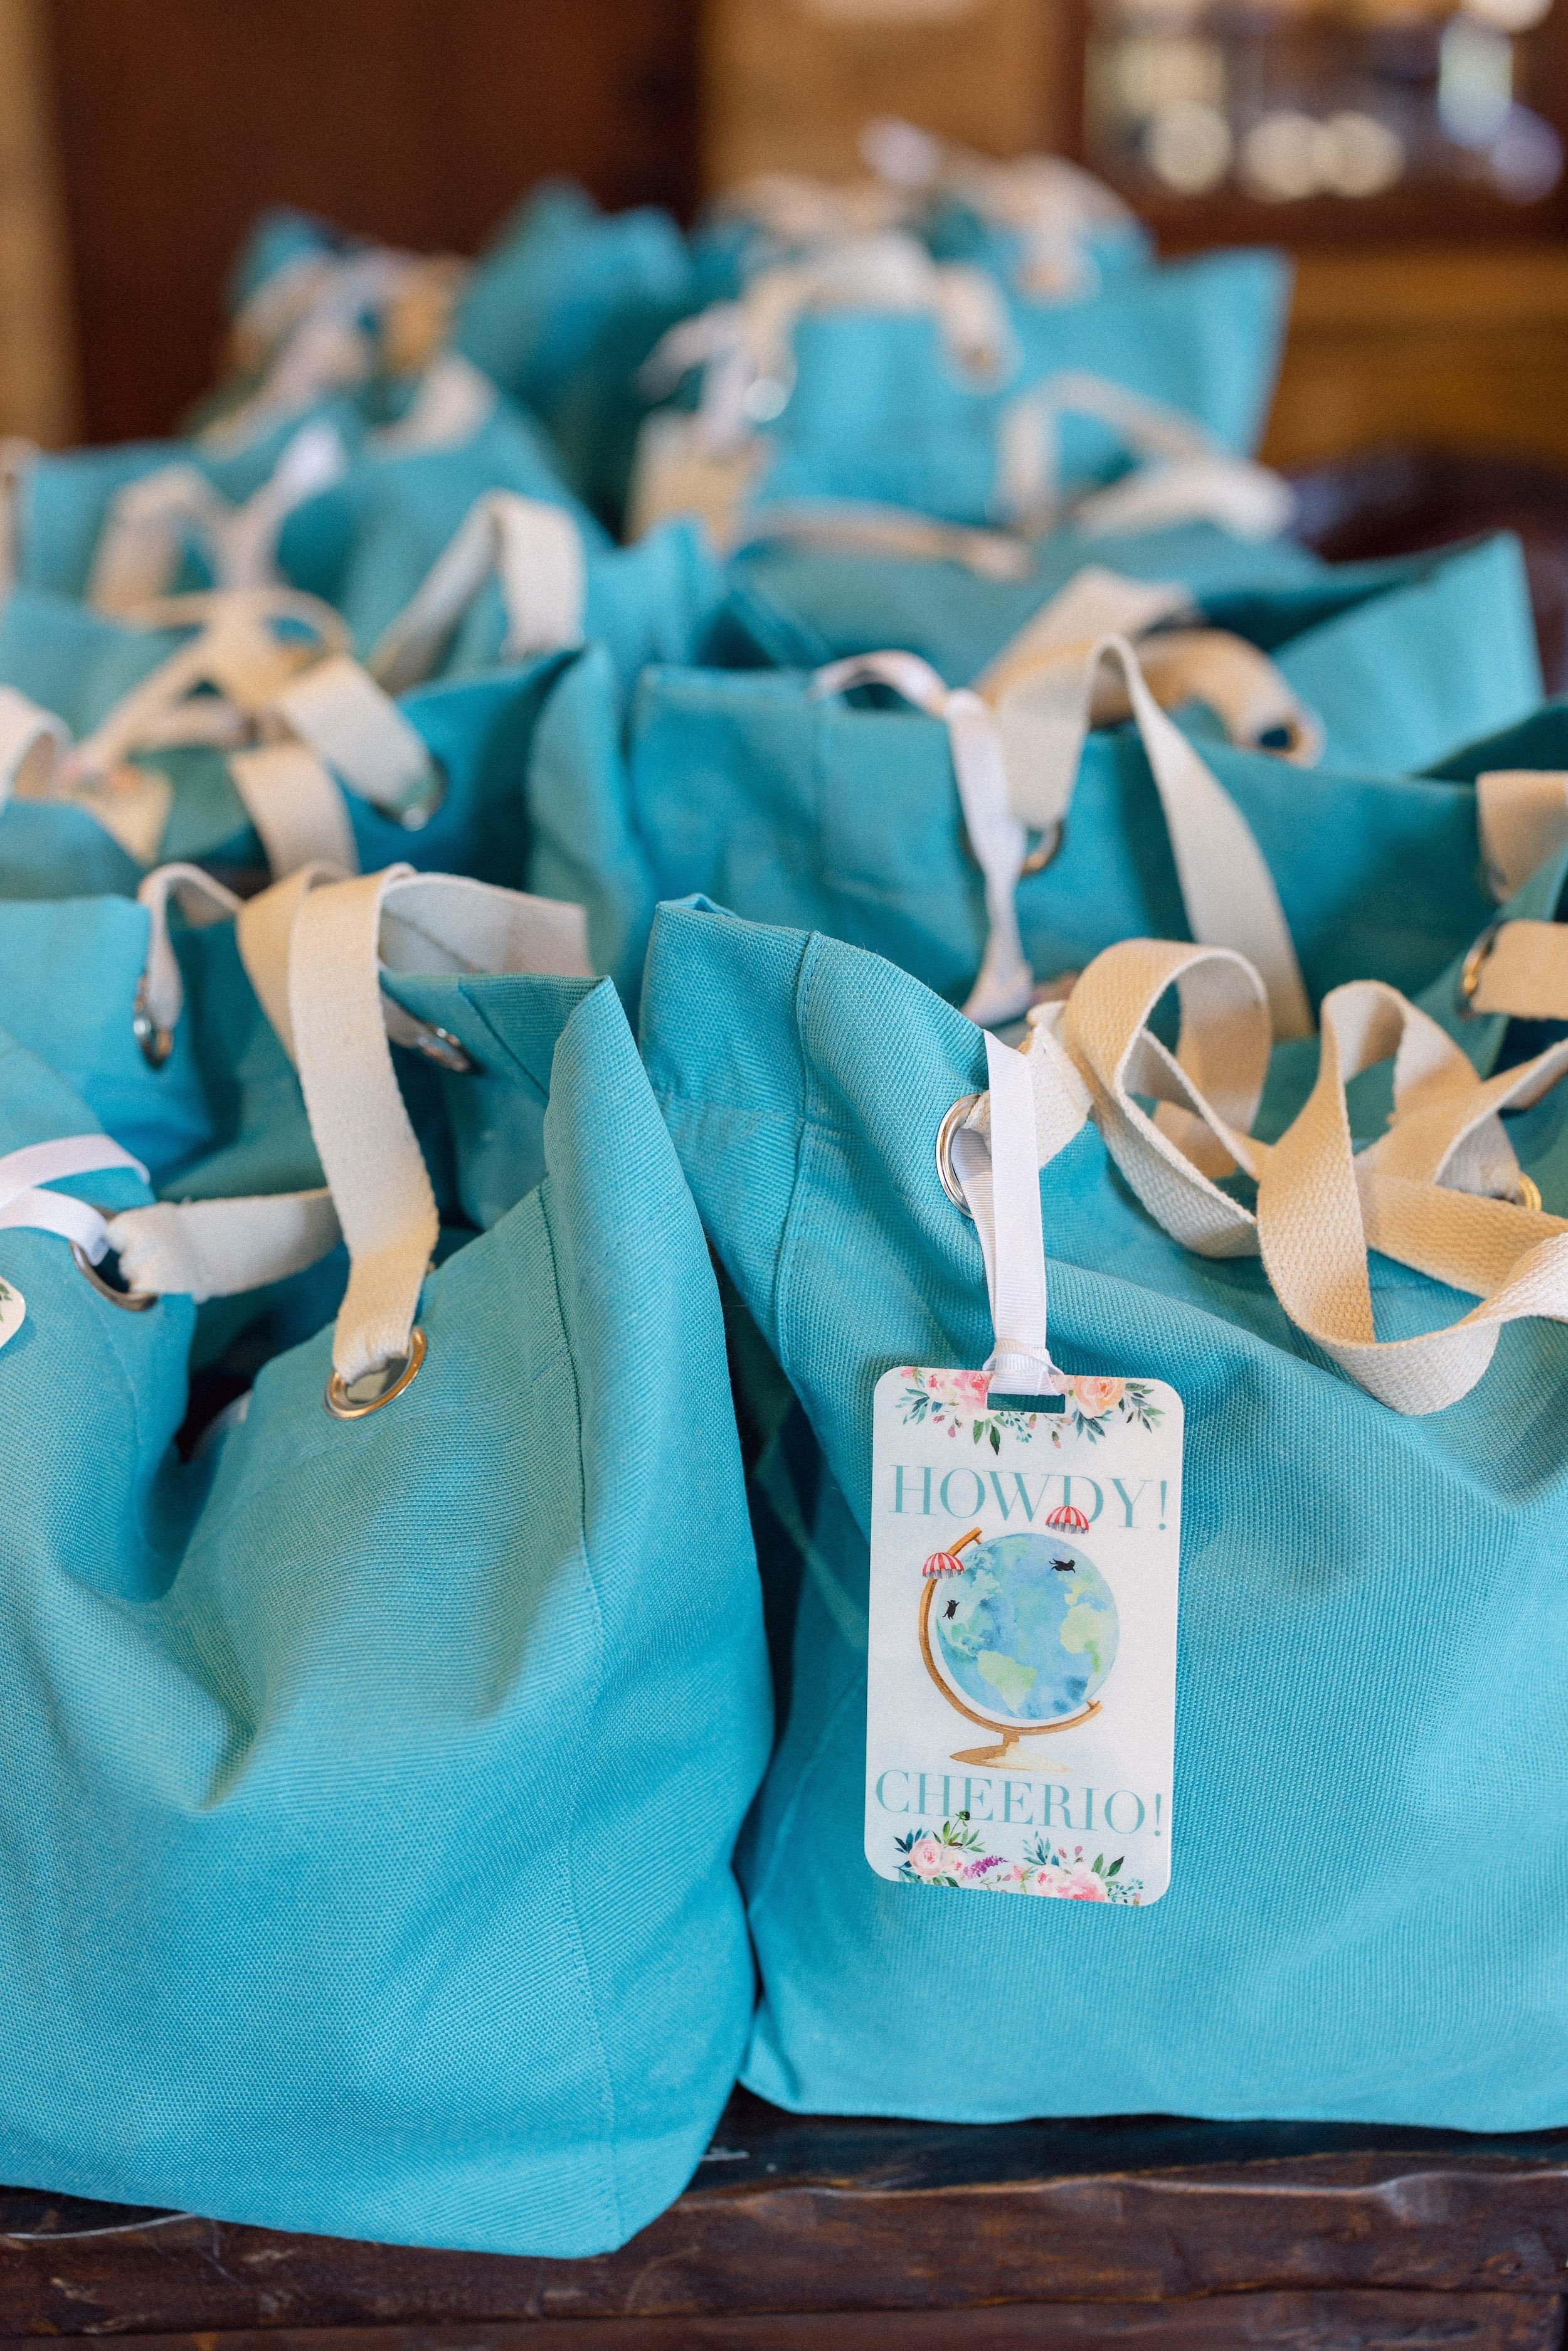 texas-hill-country-wedding-rehearsal-dinner-wedding-welcome-bags-lined-up.jpeg